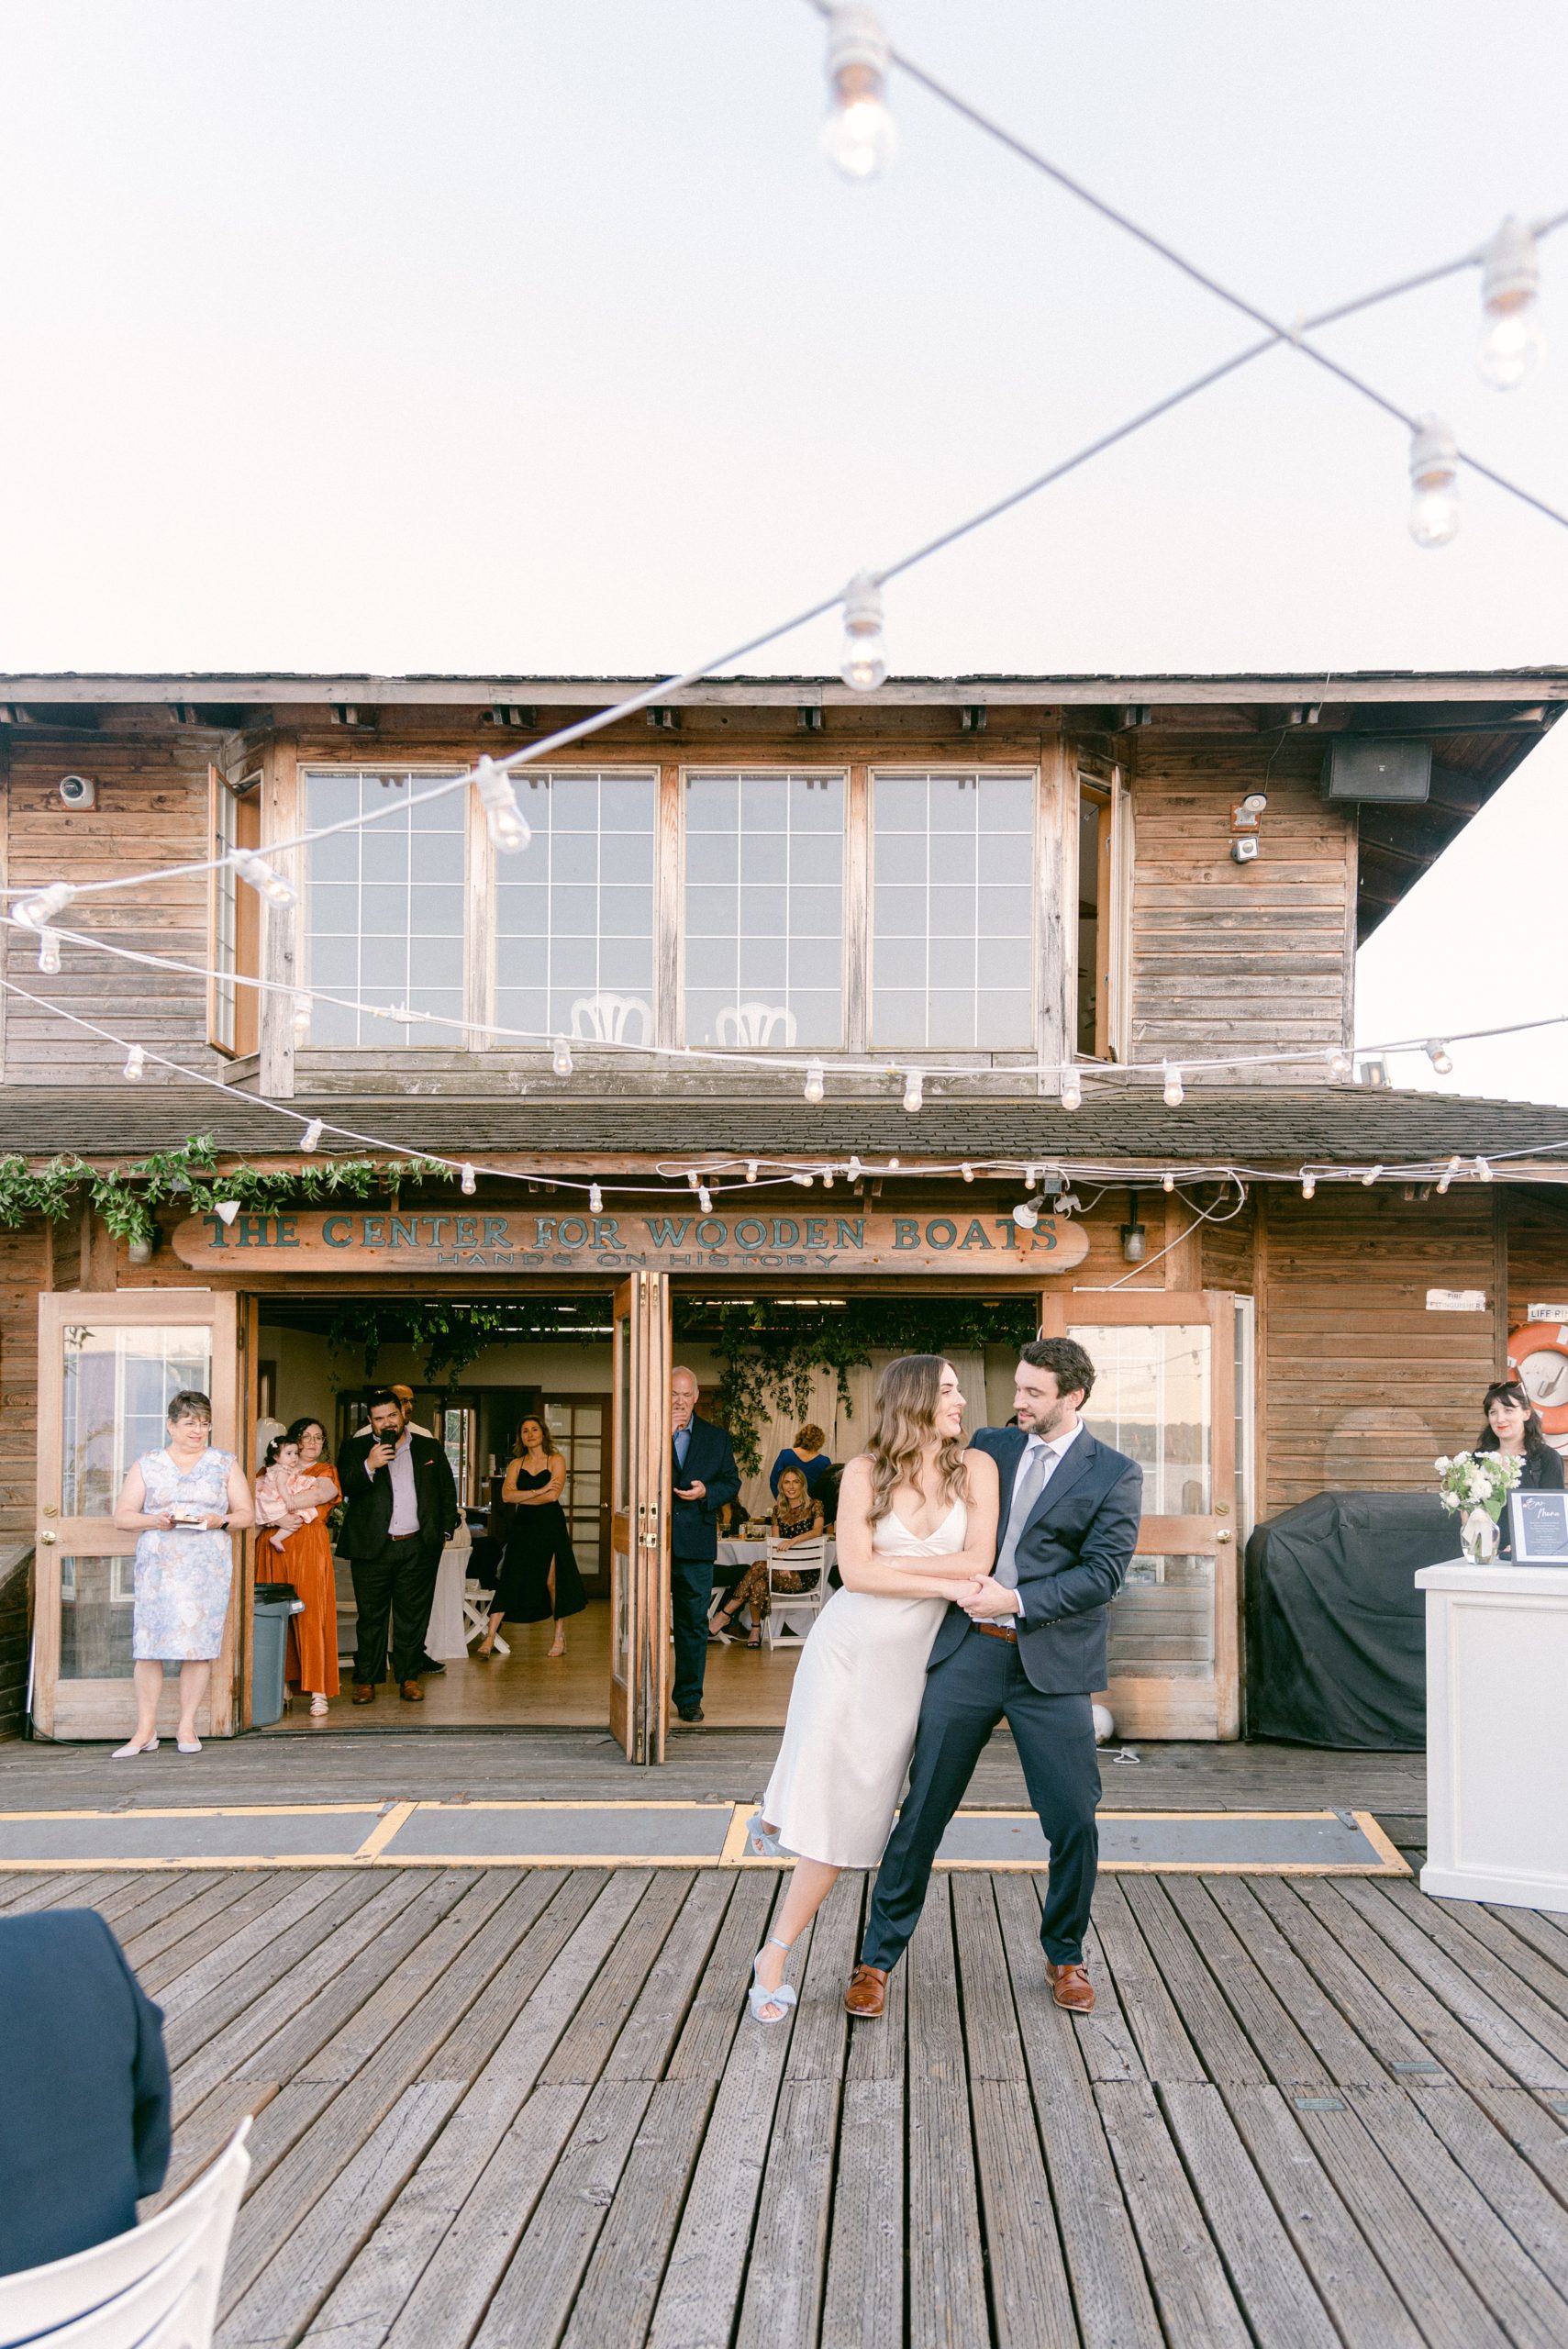 Fine Art Weddings in Seattle Washington. The Center for Wooden Boats, Bride and Groom share their first dance with the venue behind them.